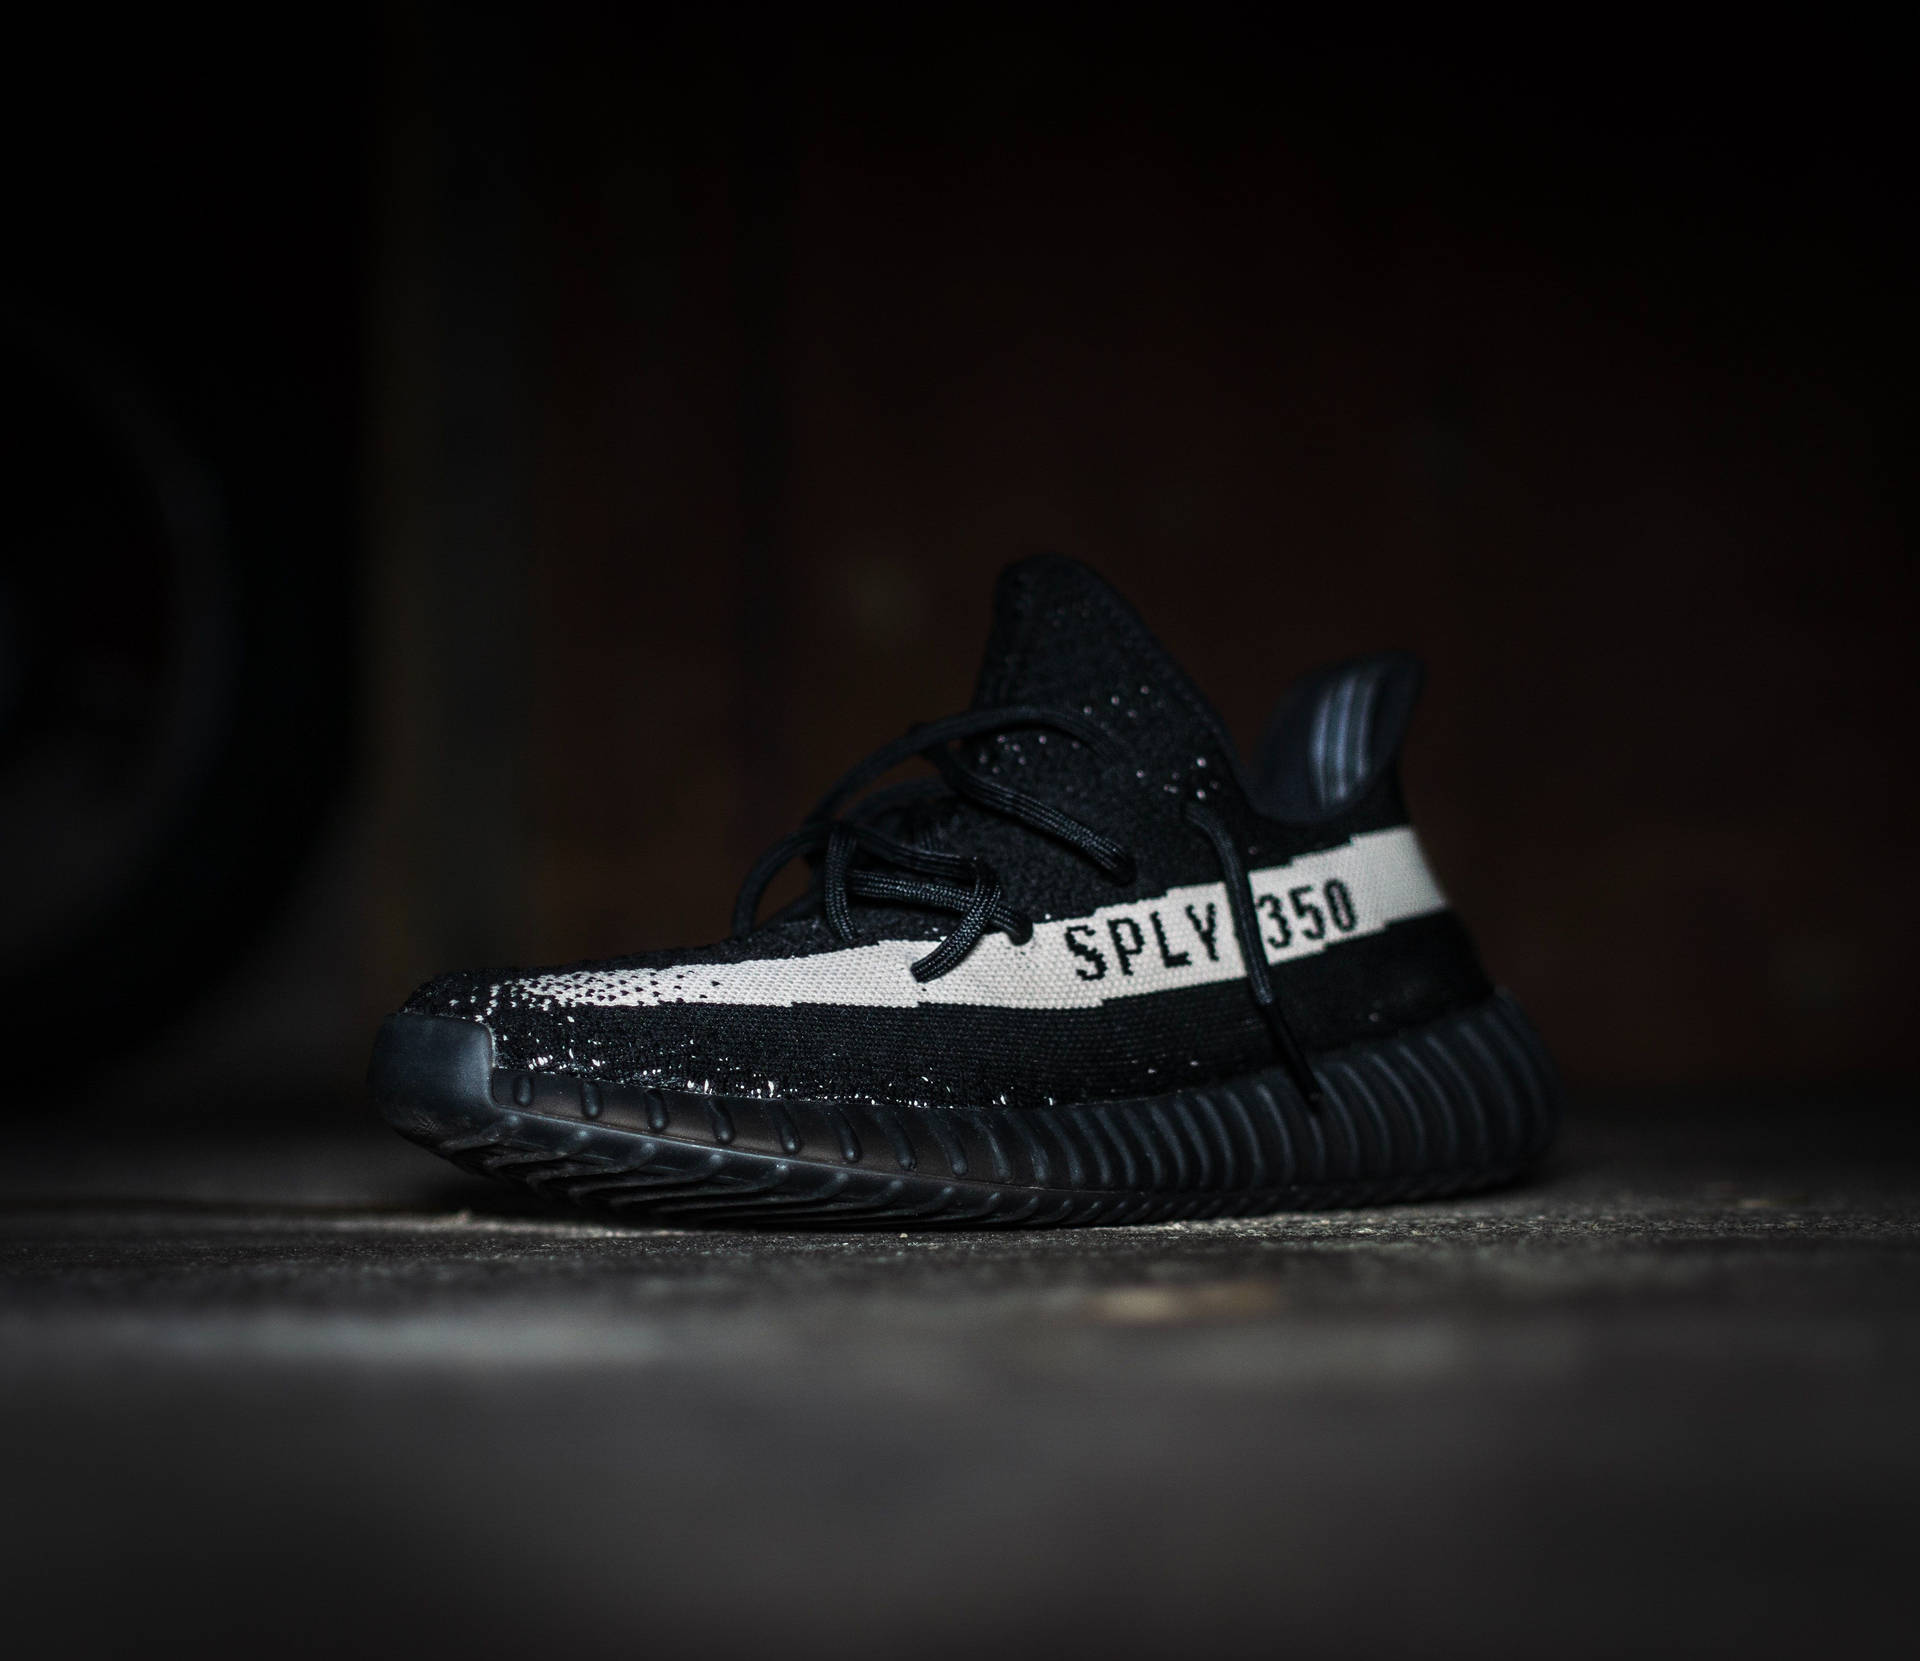 Sneaker Yeezy Boost 350 Black And White